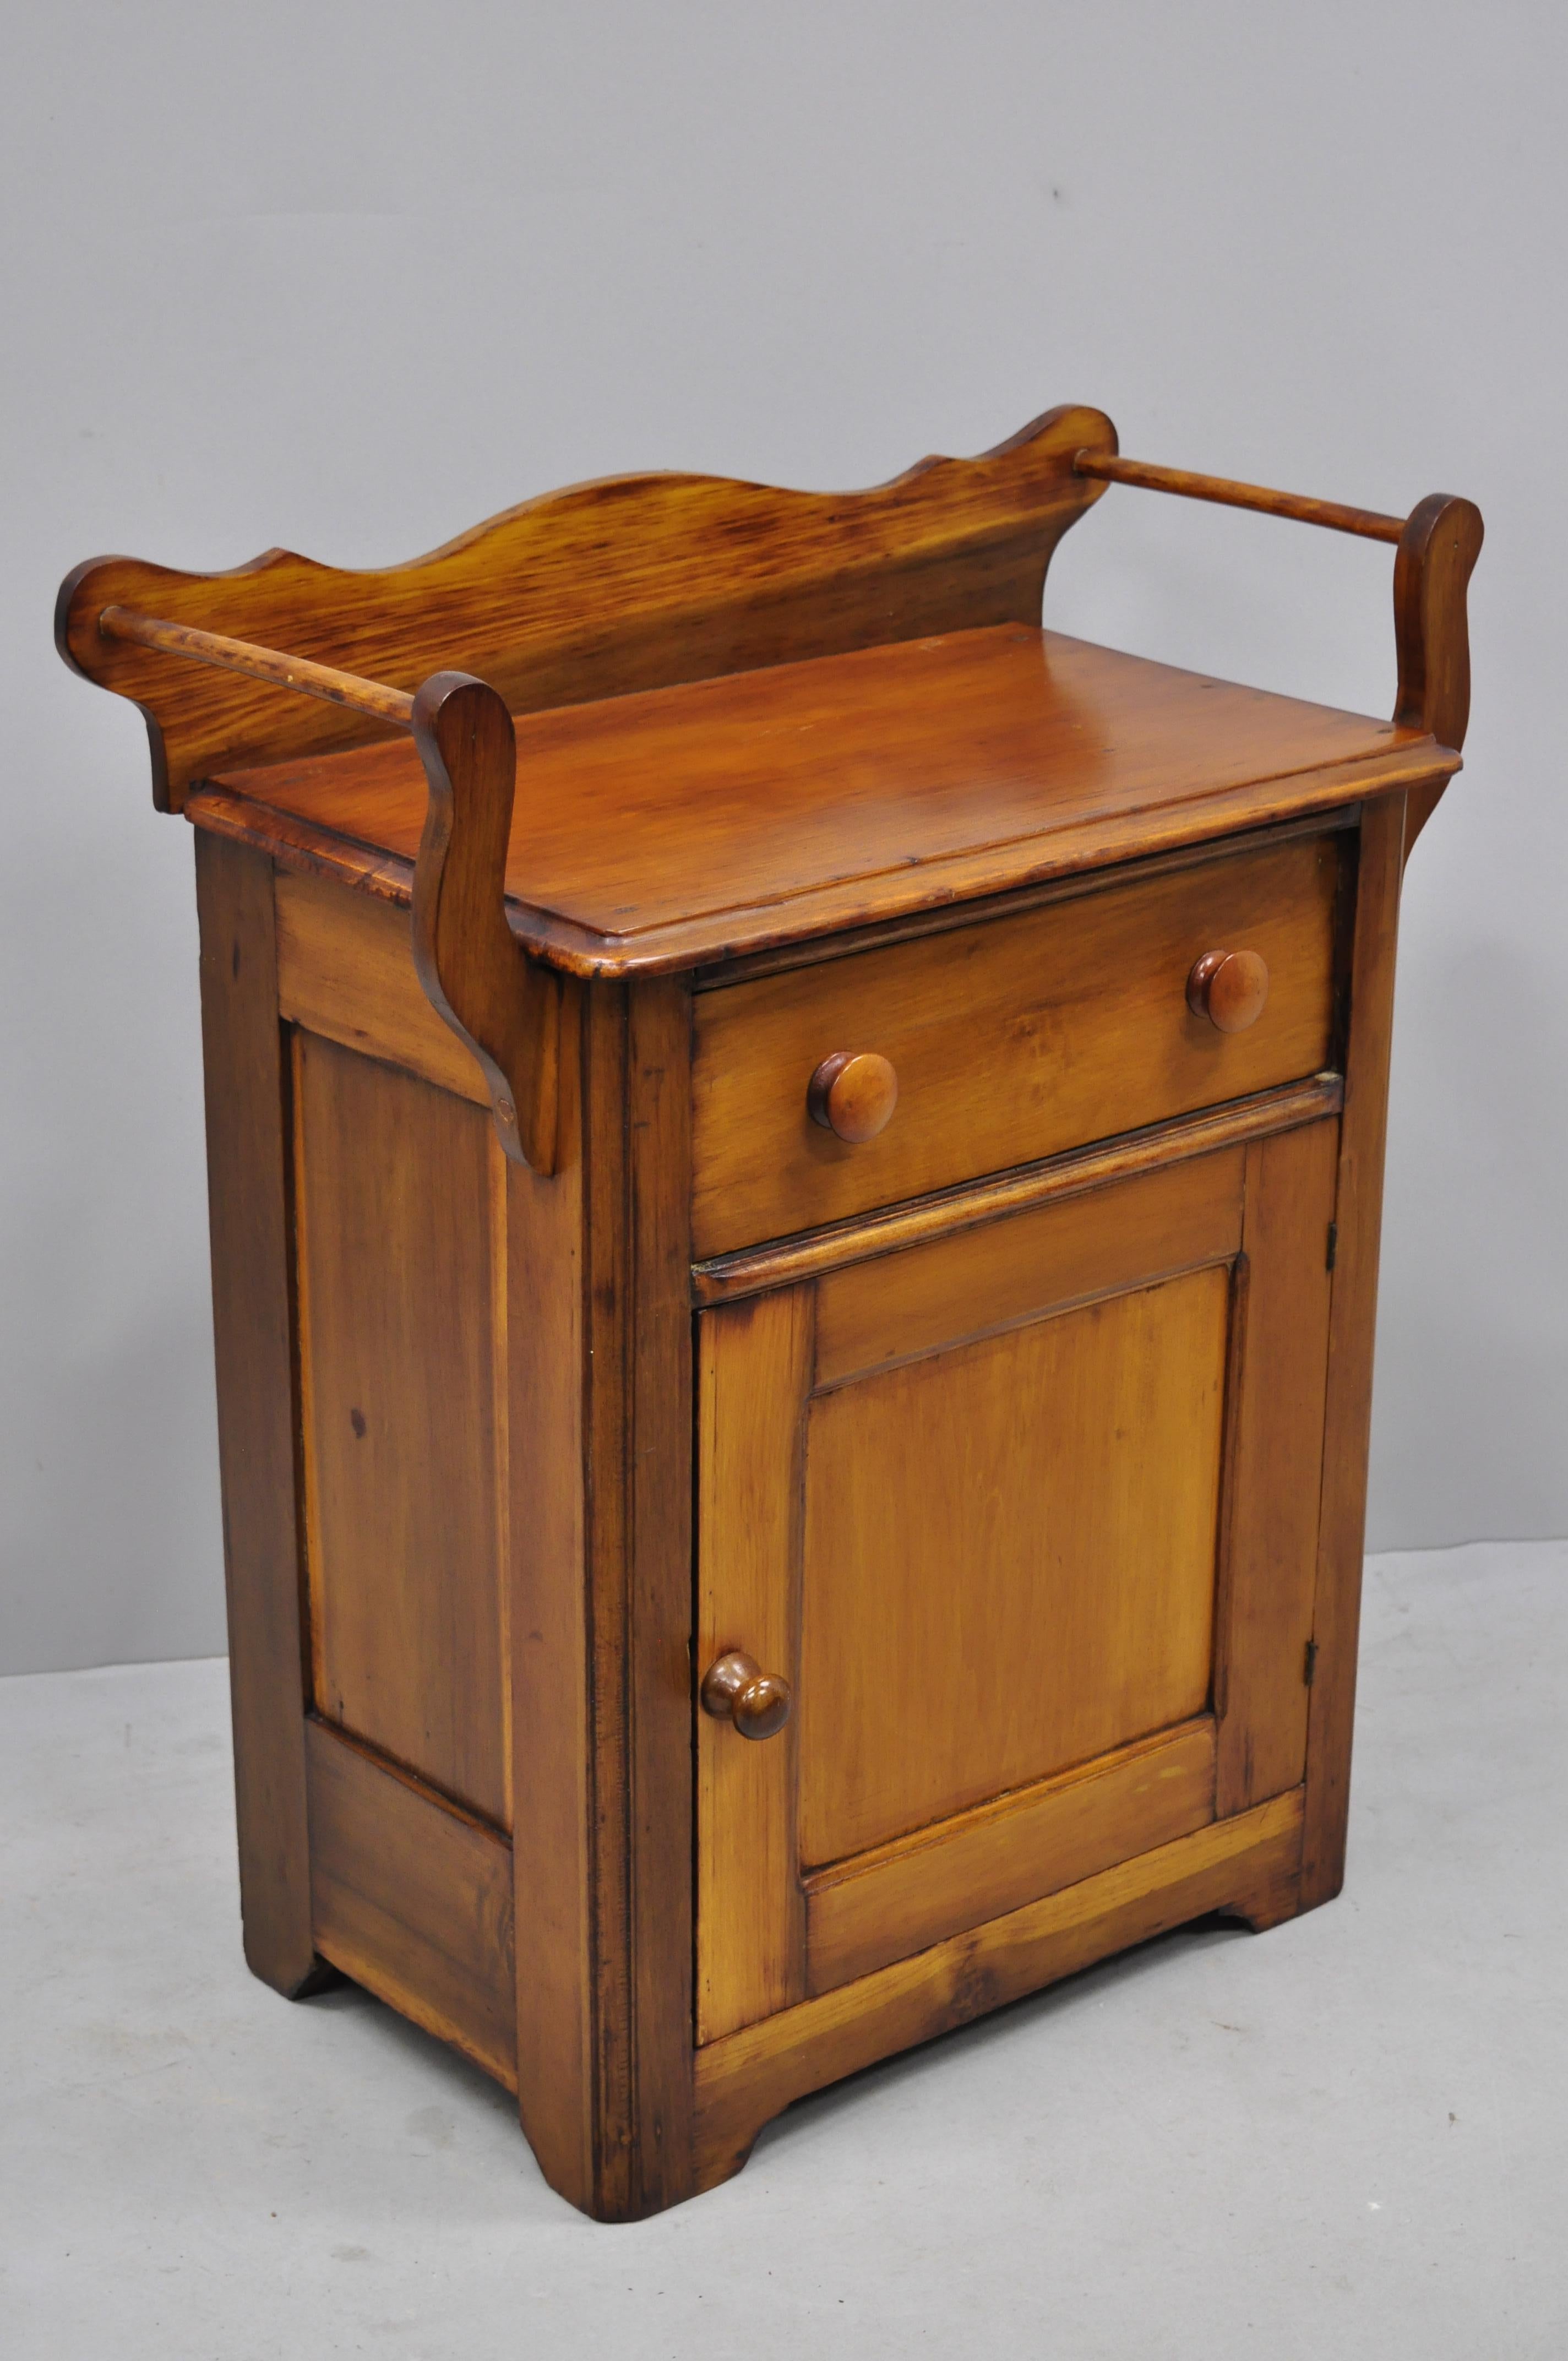 Antique American primitive 19th century pinewood washstand cabinet end table. Item features shaped backsplash, 2 towel bars, solid wood construction, beautiful wood grain, 1 swing door, 1 dovetailed drawer, very nice antique item, quality American